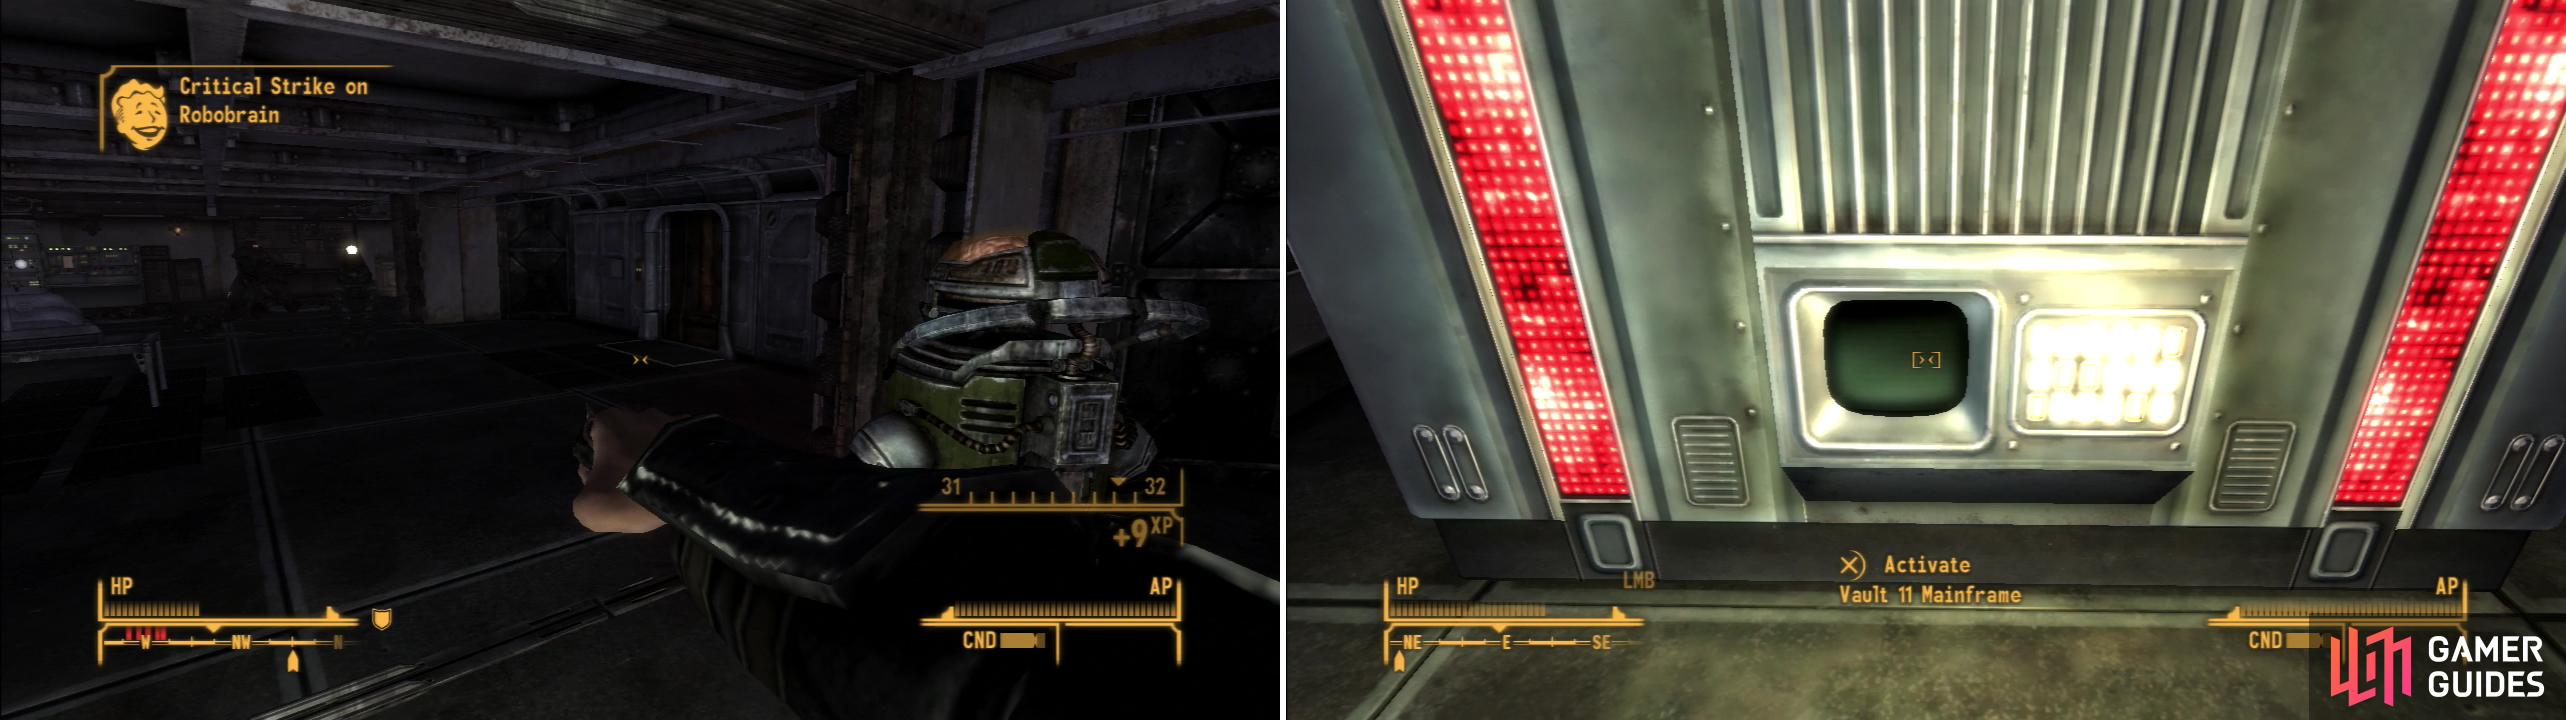 Fight off the robots that ended the life of many an Overseer (left) then hack the Vault 11 Mainframe to find out exactly what happened to the vault and its dwellers (right).